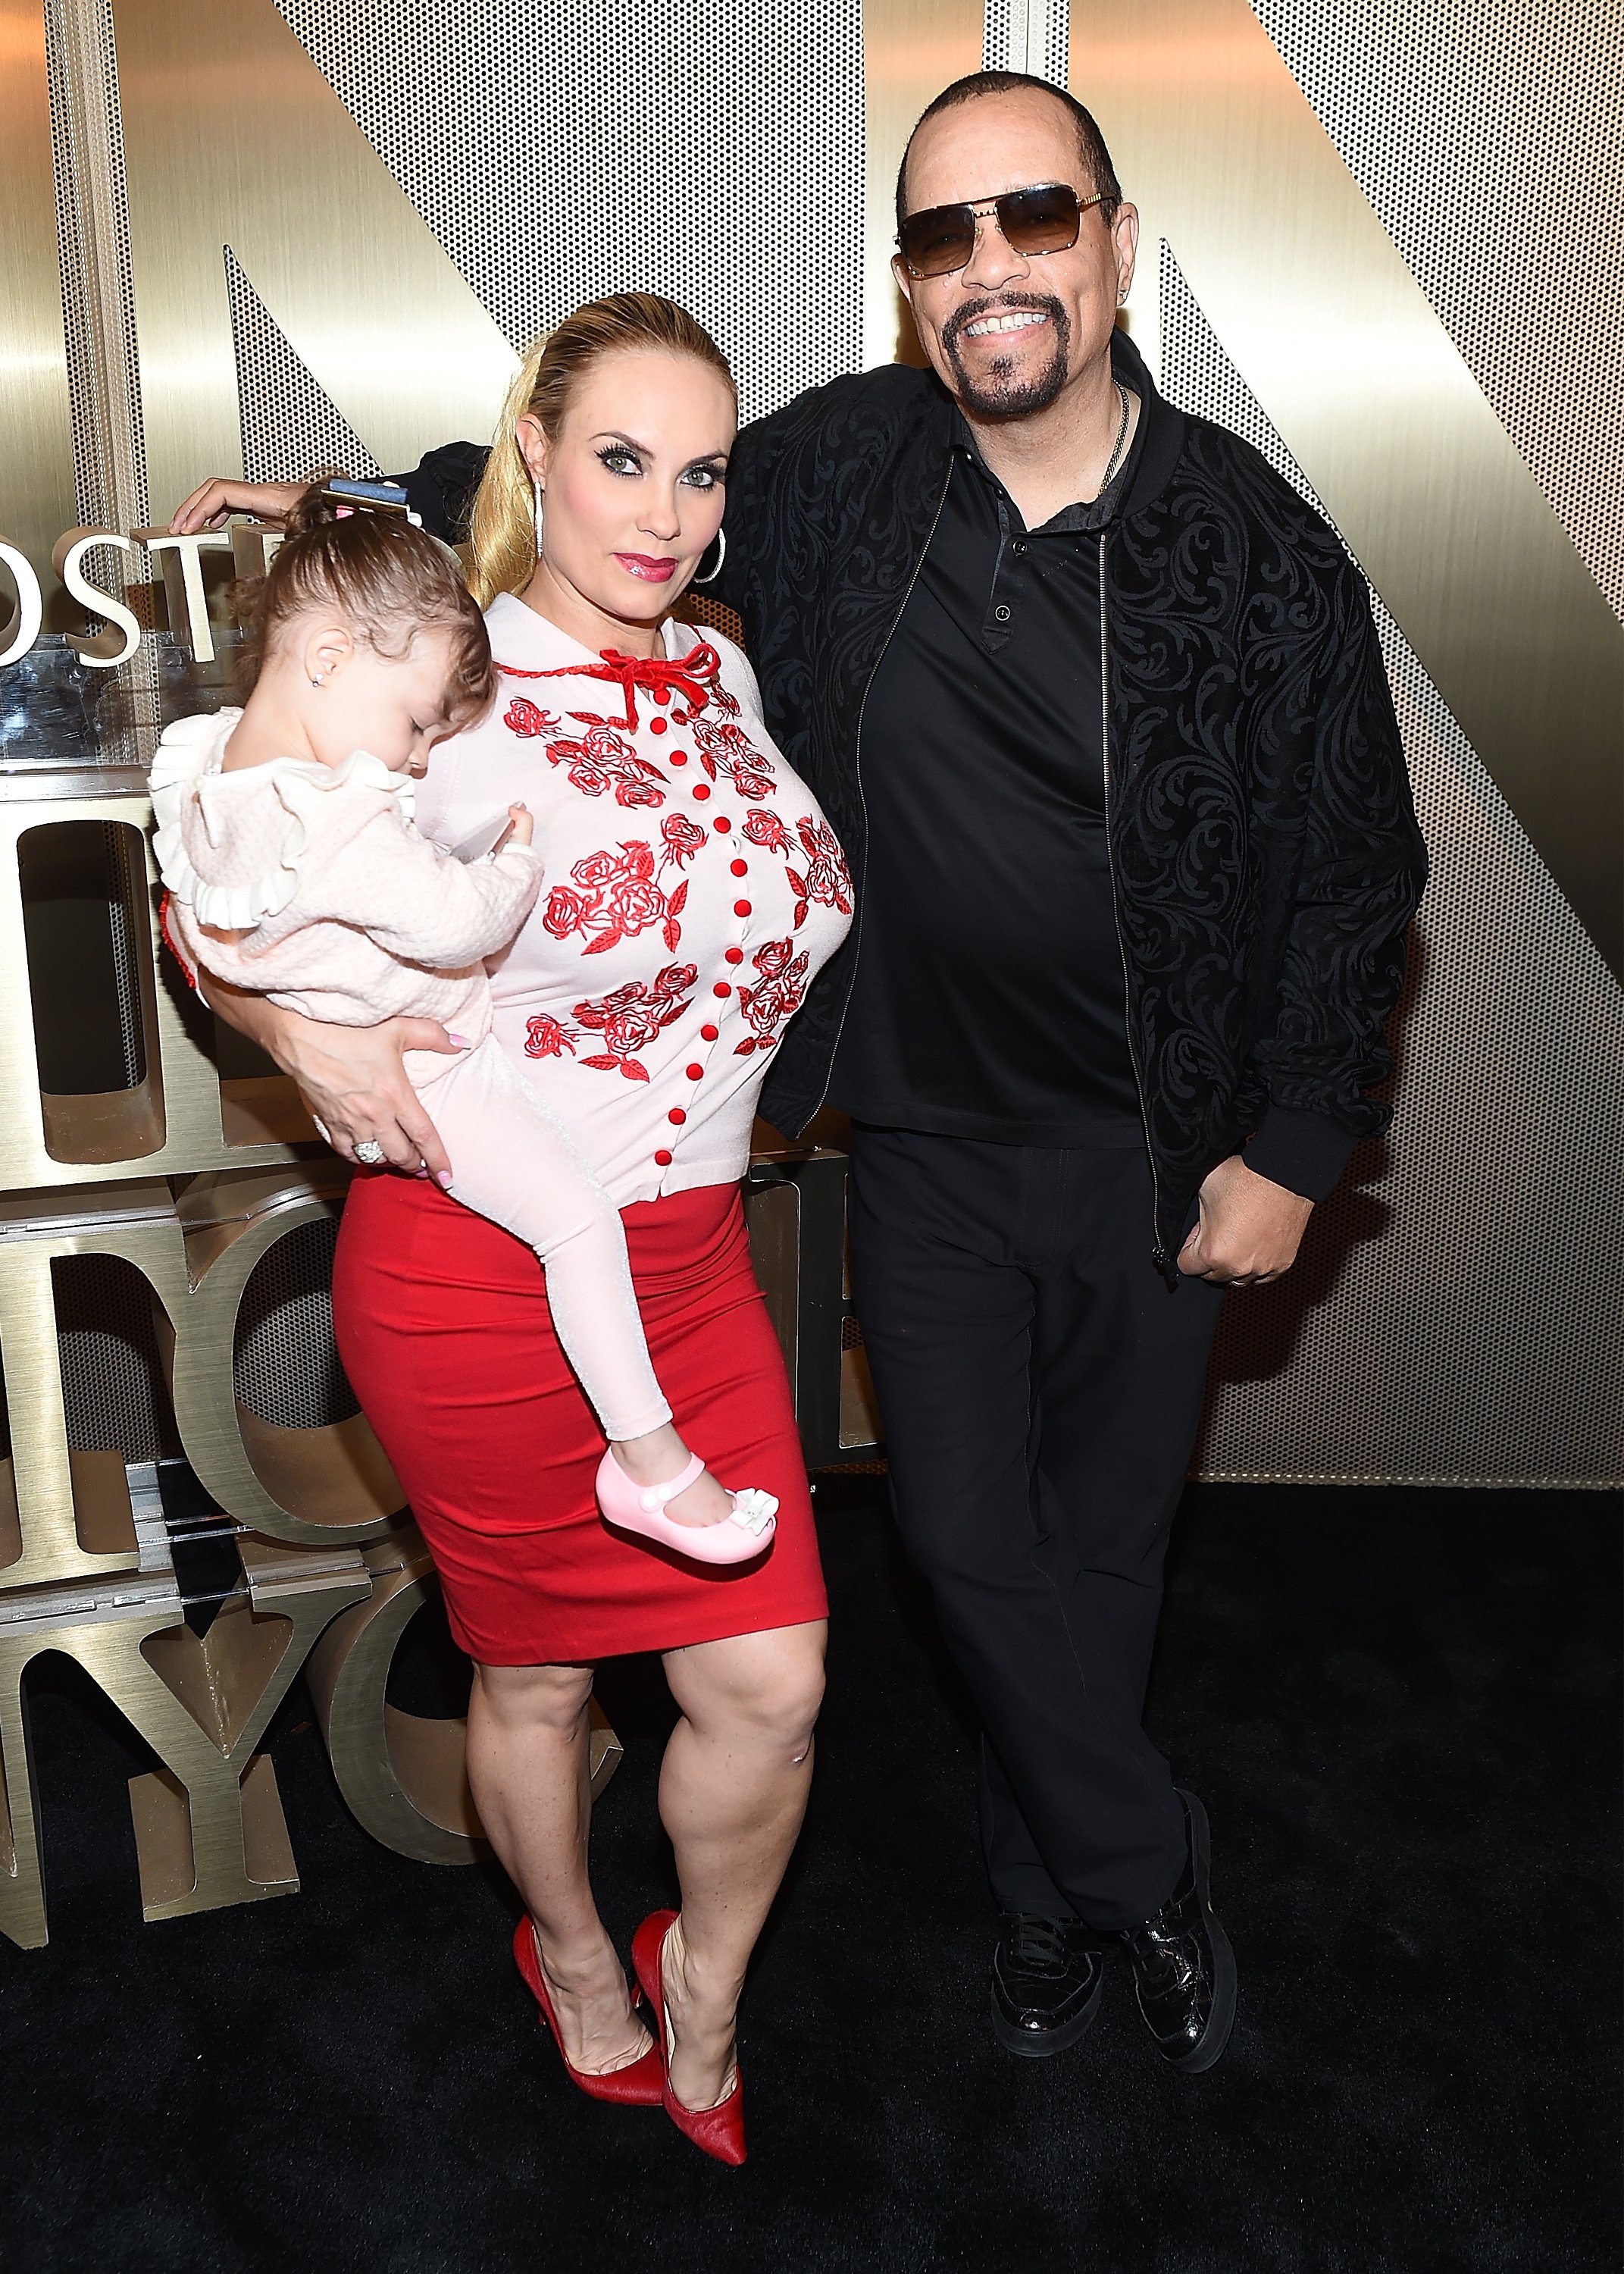 Coco Austin, daughter Chanel Nicole Marrow, and Ice-T at the Nordstrom Men's Store Opening on April 10, 2018 in New York City. | Photo: Getty Images